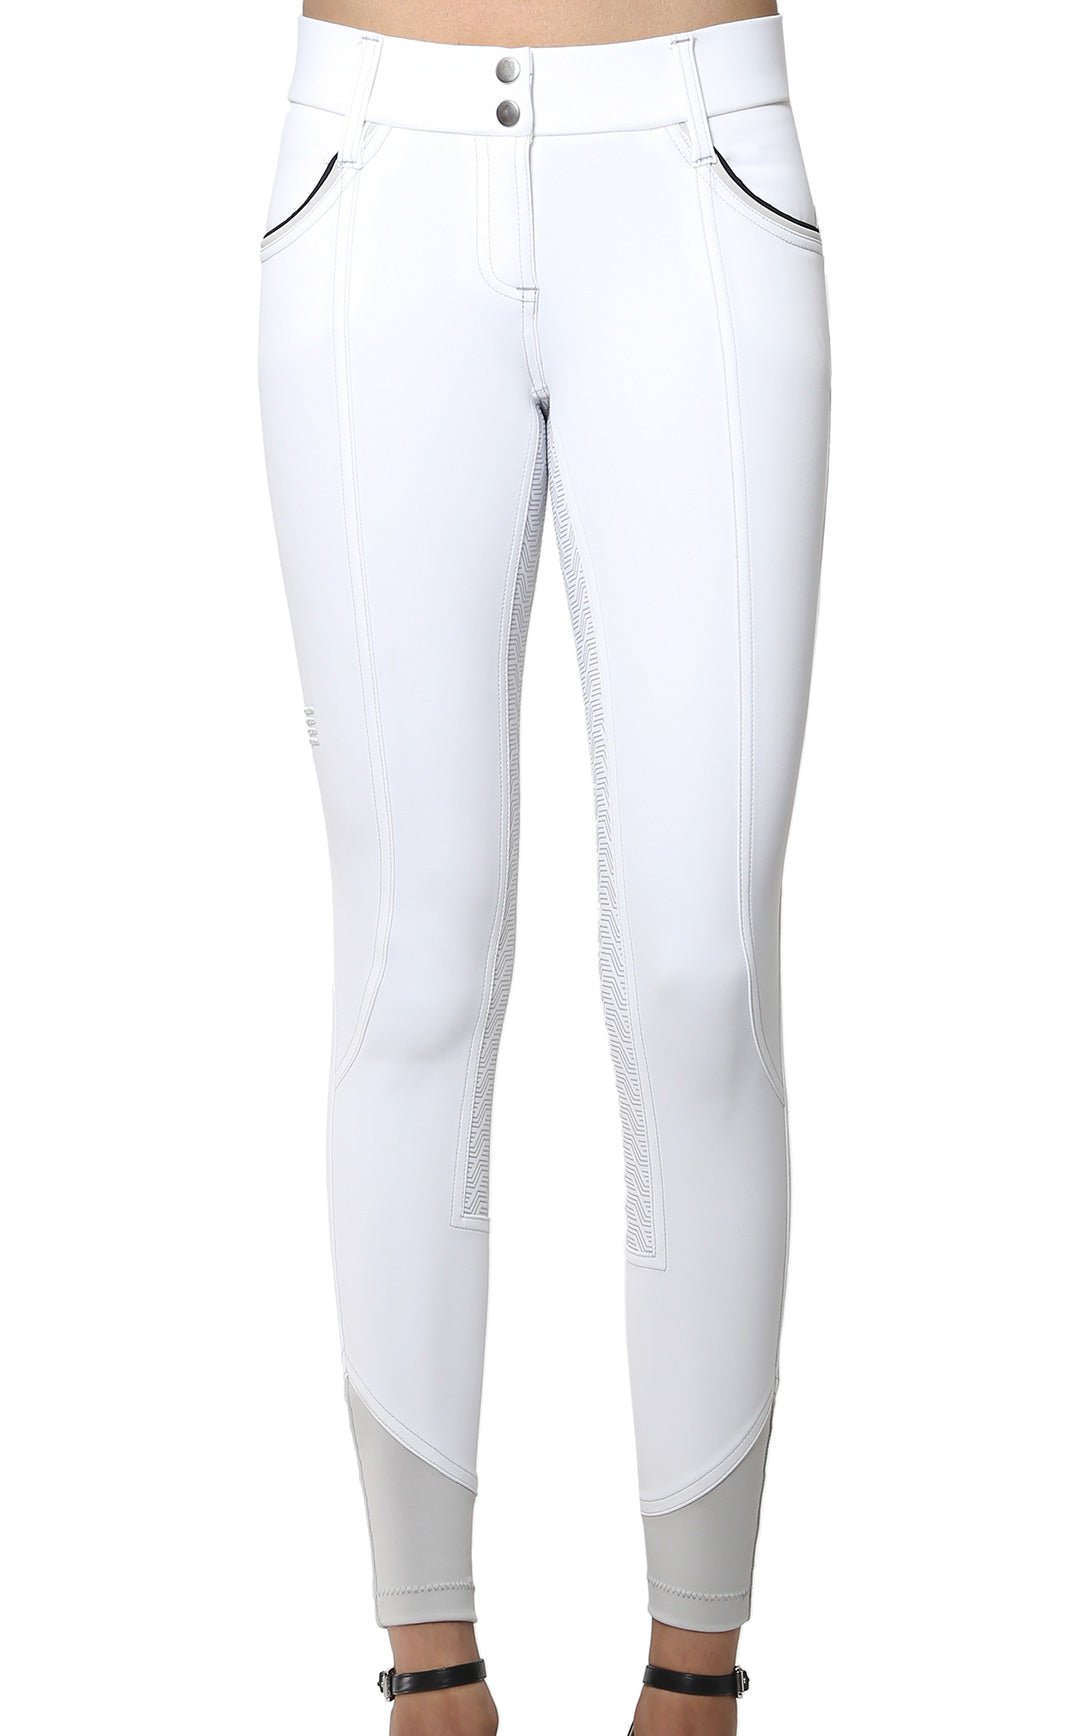 GhoDho Adena T600® Full Seat Breeches White - Equiluxe Tack